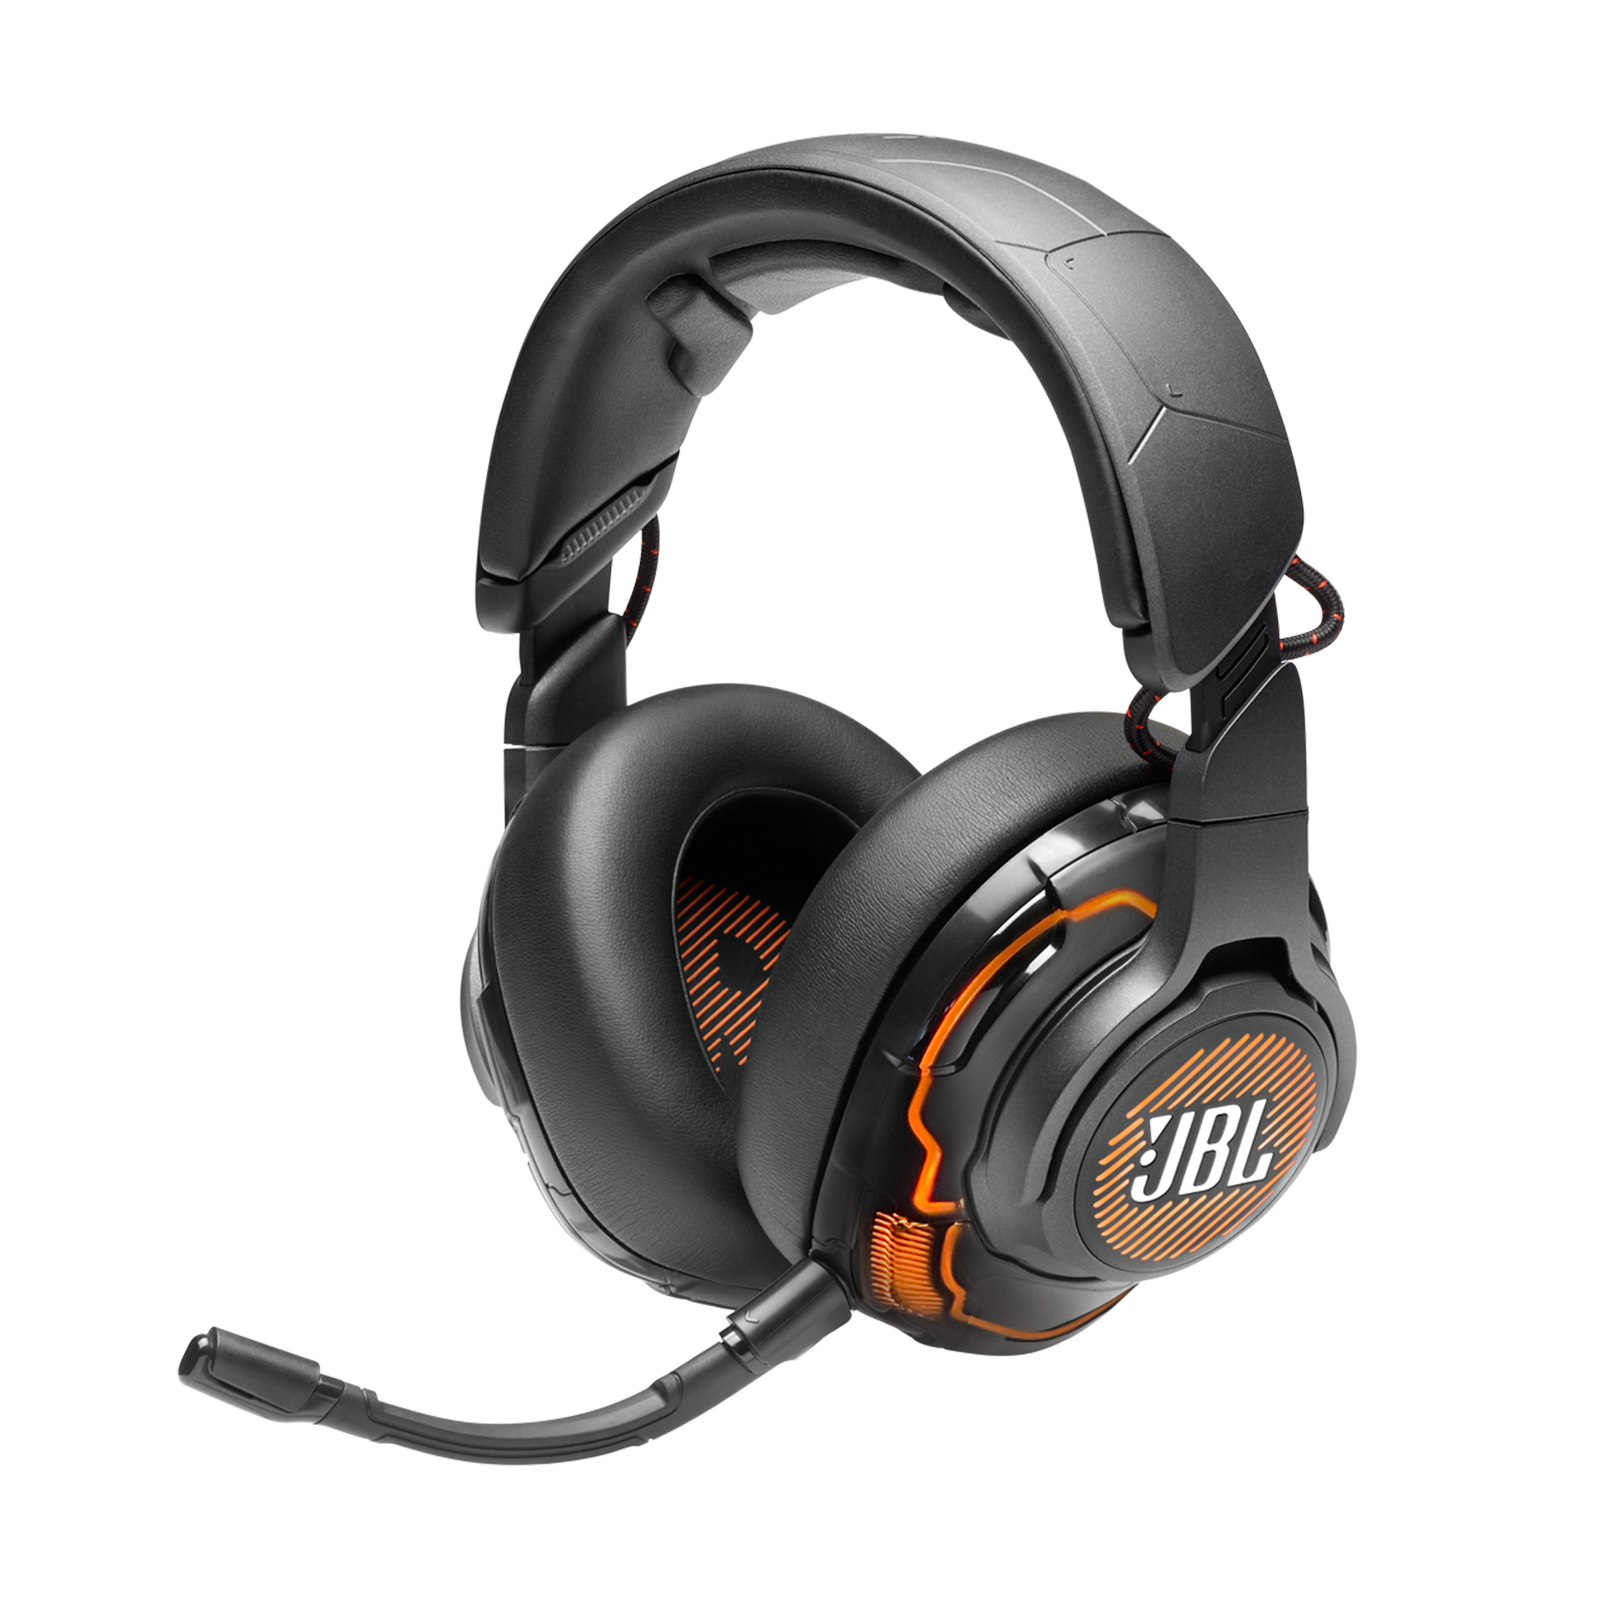 JBL Quantum ONE | Over-Ear Wired Gaming Headset - JBL 9.1 Surround Sound & Active Noise-Cancellation - PS4/XBOX/Switch/PC Compatible Gaming Headset REFURBISHED